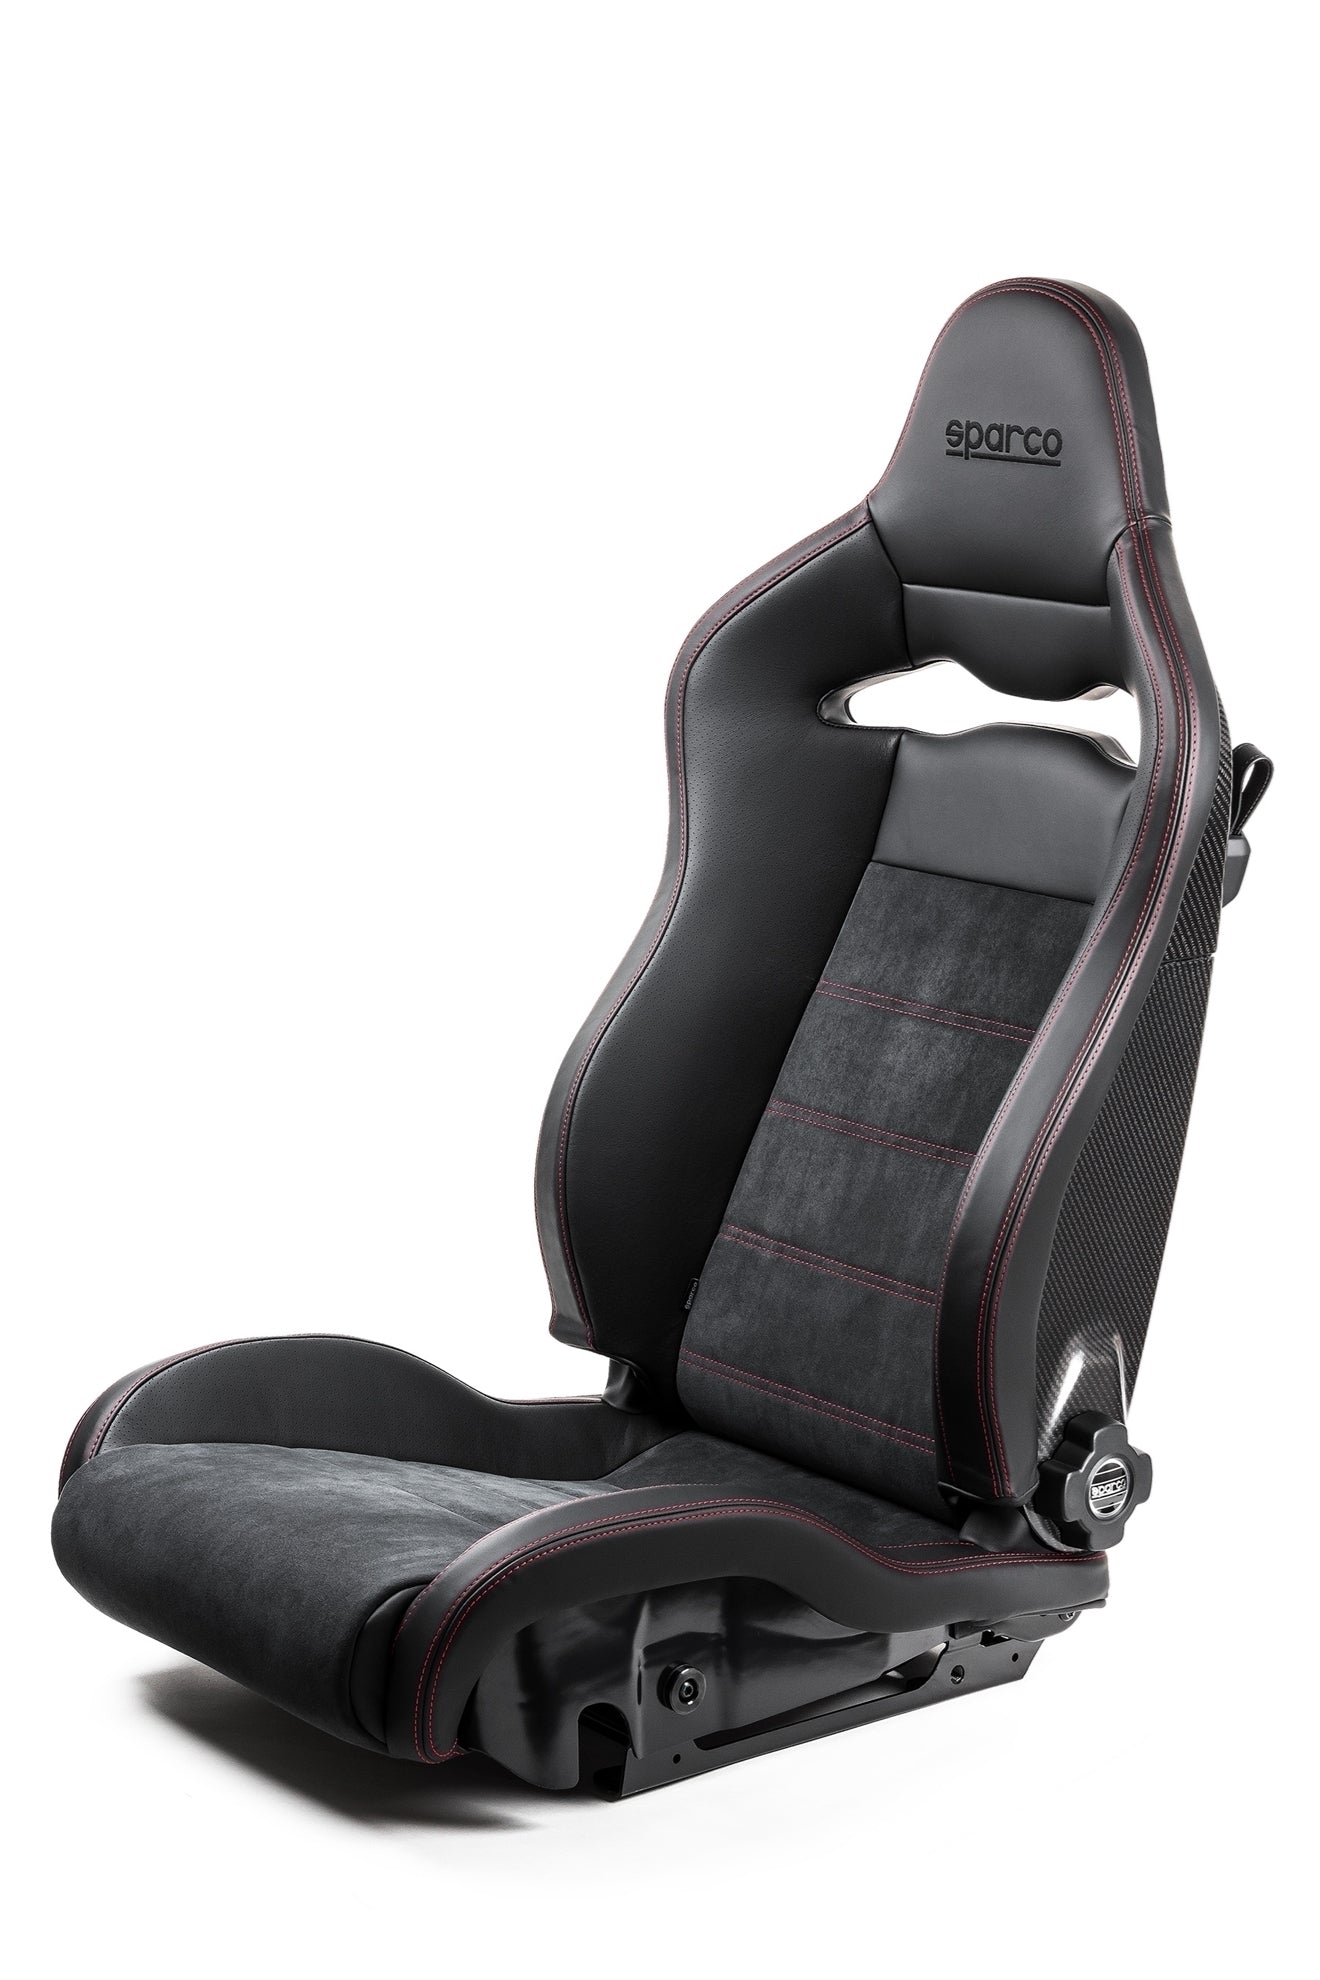 <a href="https://envisiontuning.com/collections/sparco-racing-seats">Sparco Racing Seats</a>